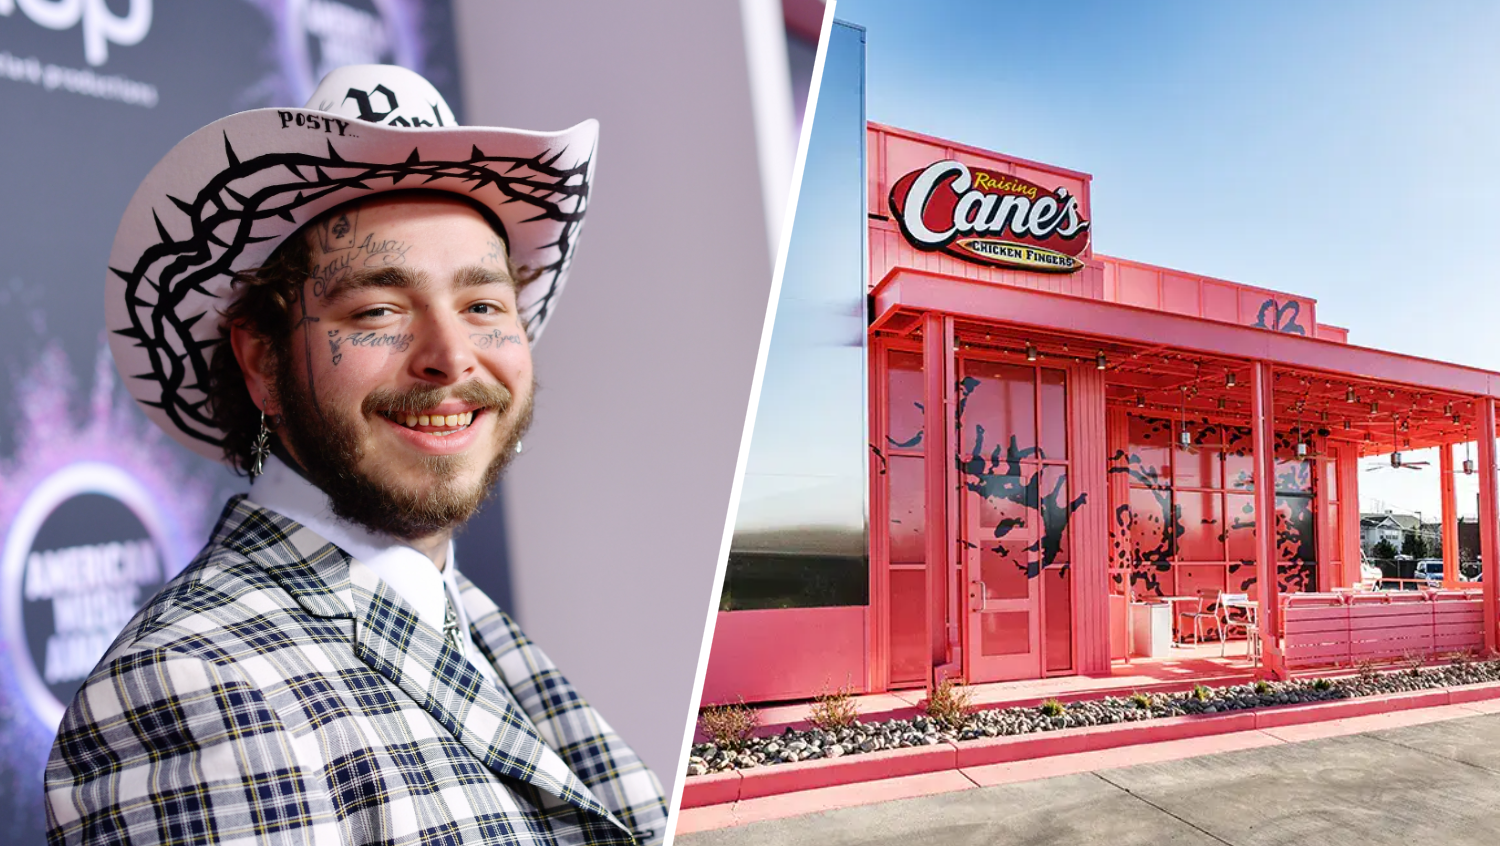 Raising Cane's Post Malone-themed cups go national - Axios Salt Lake City